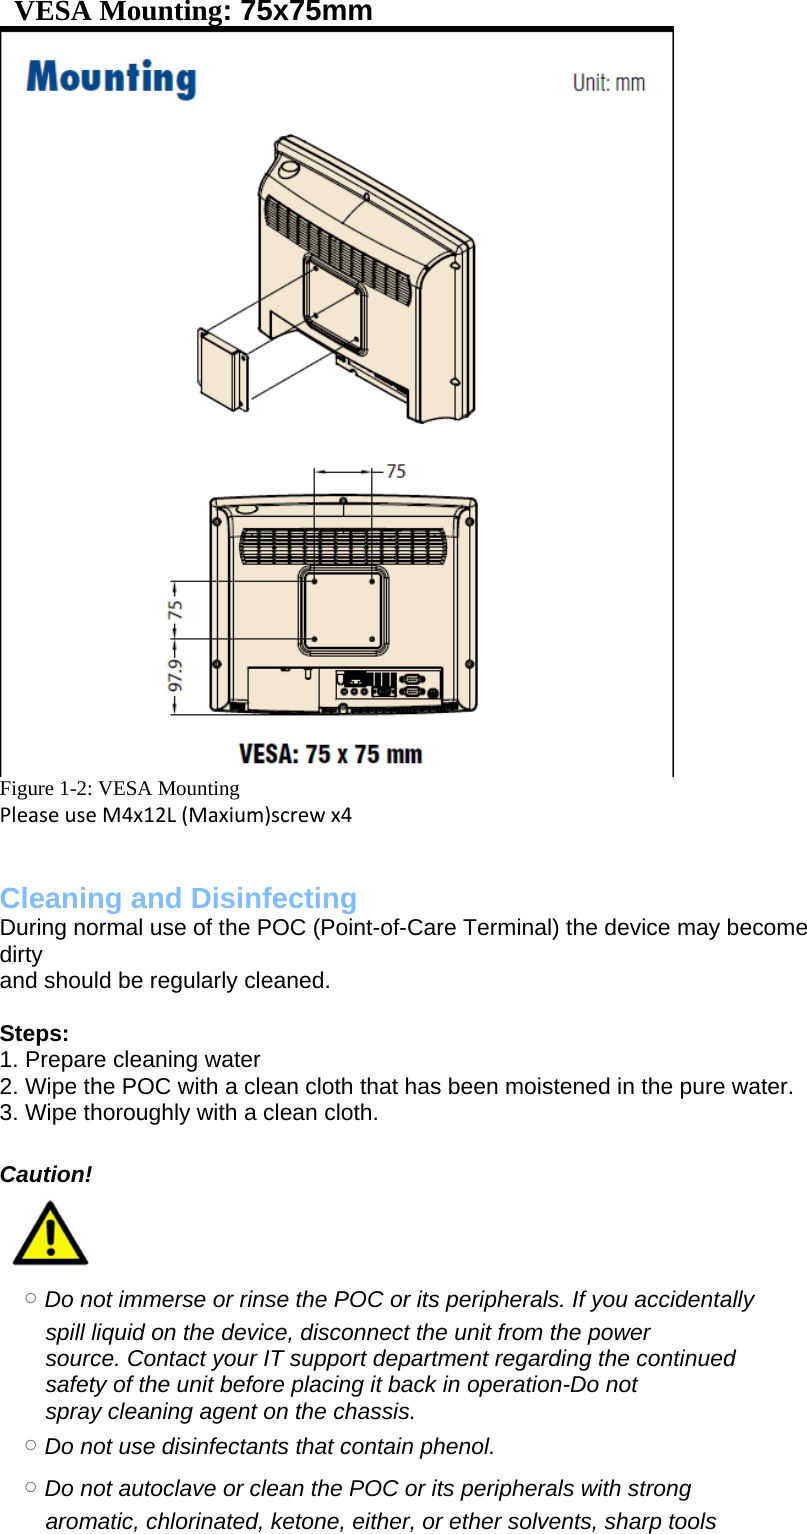    VESA Mounting: 75x75mm  Figure 1-2: VESA Mounting PleaseuseM4x12L(Maxium)screwx4  Cleaning and Disinfecting  During normal use of the POC (Point-of-Care Terminal) the device may become dirty and should be regularly cleaned.  Steps: 1. Prepare cleaning water 2. Wipe the POC with a clean cloth that has been moistened in the pure water. 3. Wipe thoroughly with a clean cloth.  Caution! 　   ○ Do not immerse or rinse the POC or its peripherals. If you accidentally spill liquid on the device, disconnect the unit from the power source. Contact your IT support department regarding the continued safety of the unit before placing it back in operation-Do not spray cleaning agent on the chassis. 　○ Do not use disinfectants that contain phenol. 　○ Do not autoclave or clean the POC or its peripherals with strong aromatic, chlorinated, ketone, either, or ether solvents, sharp tools 